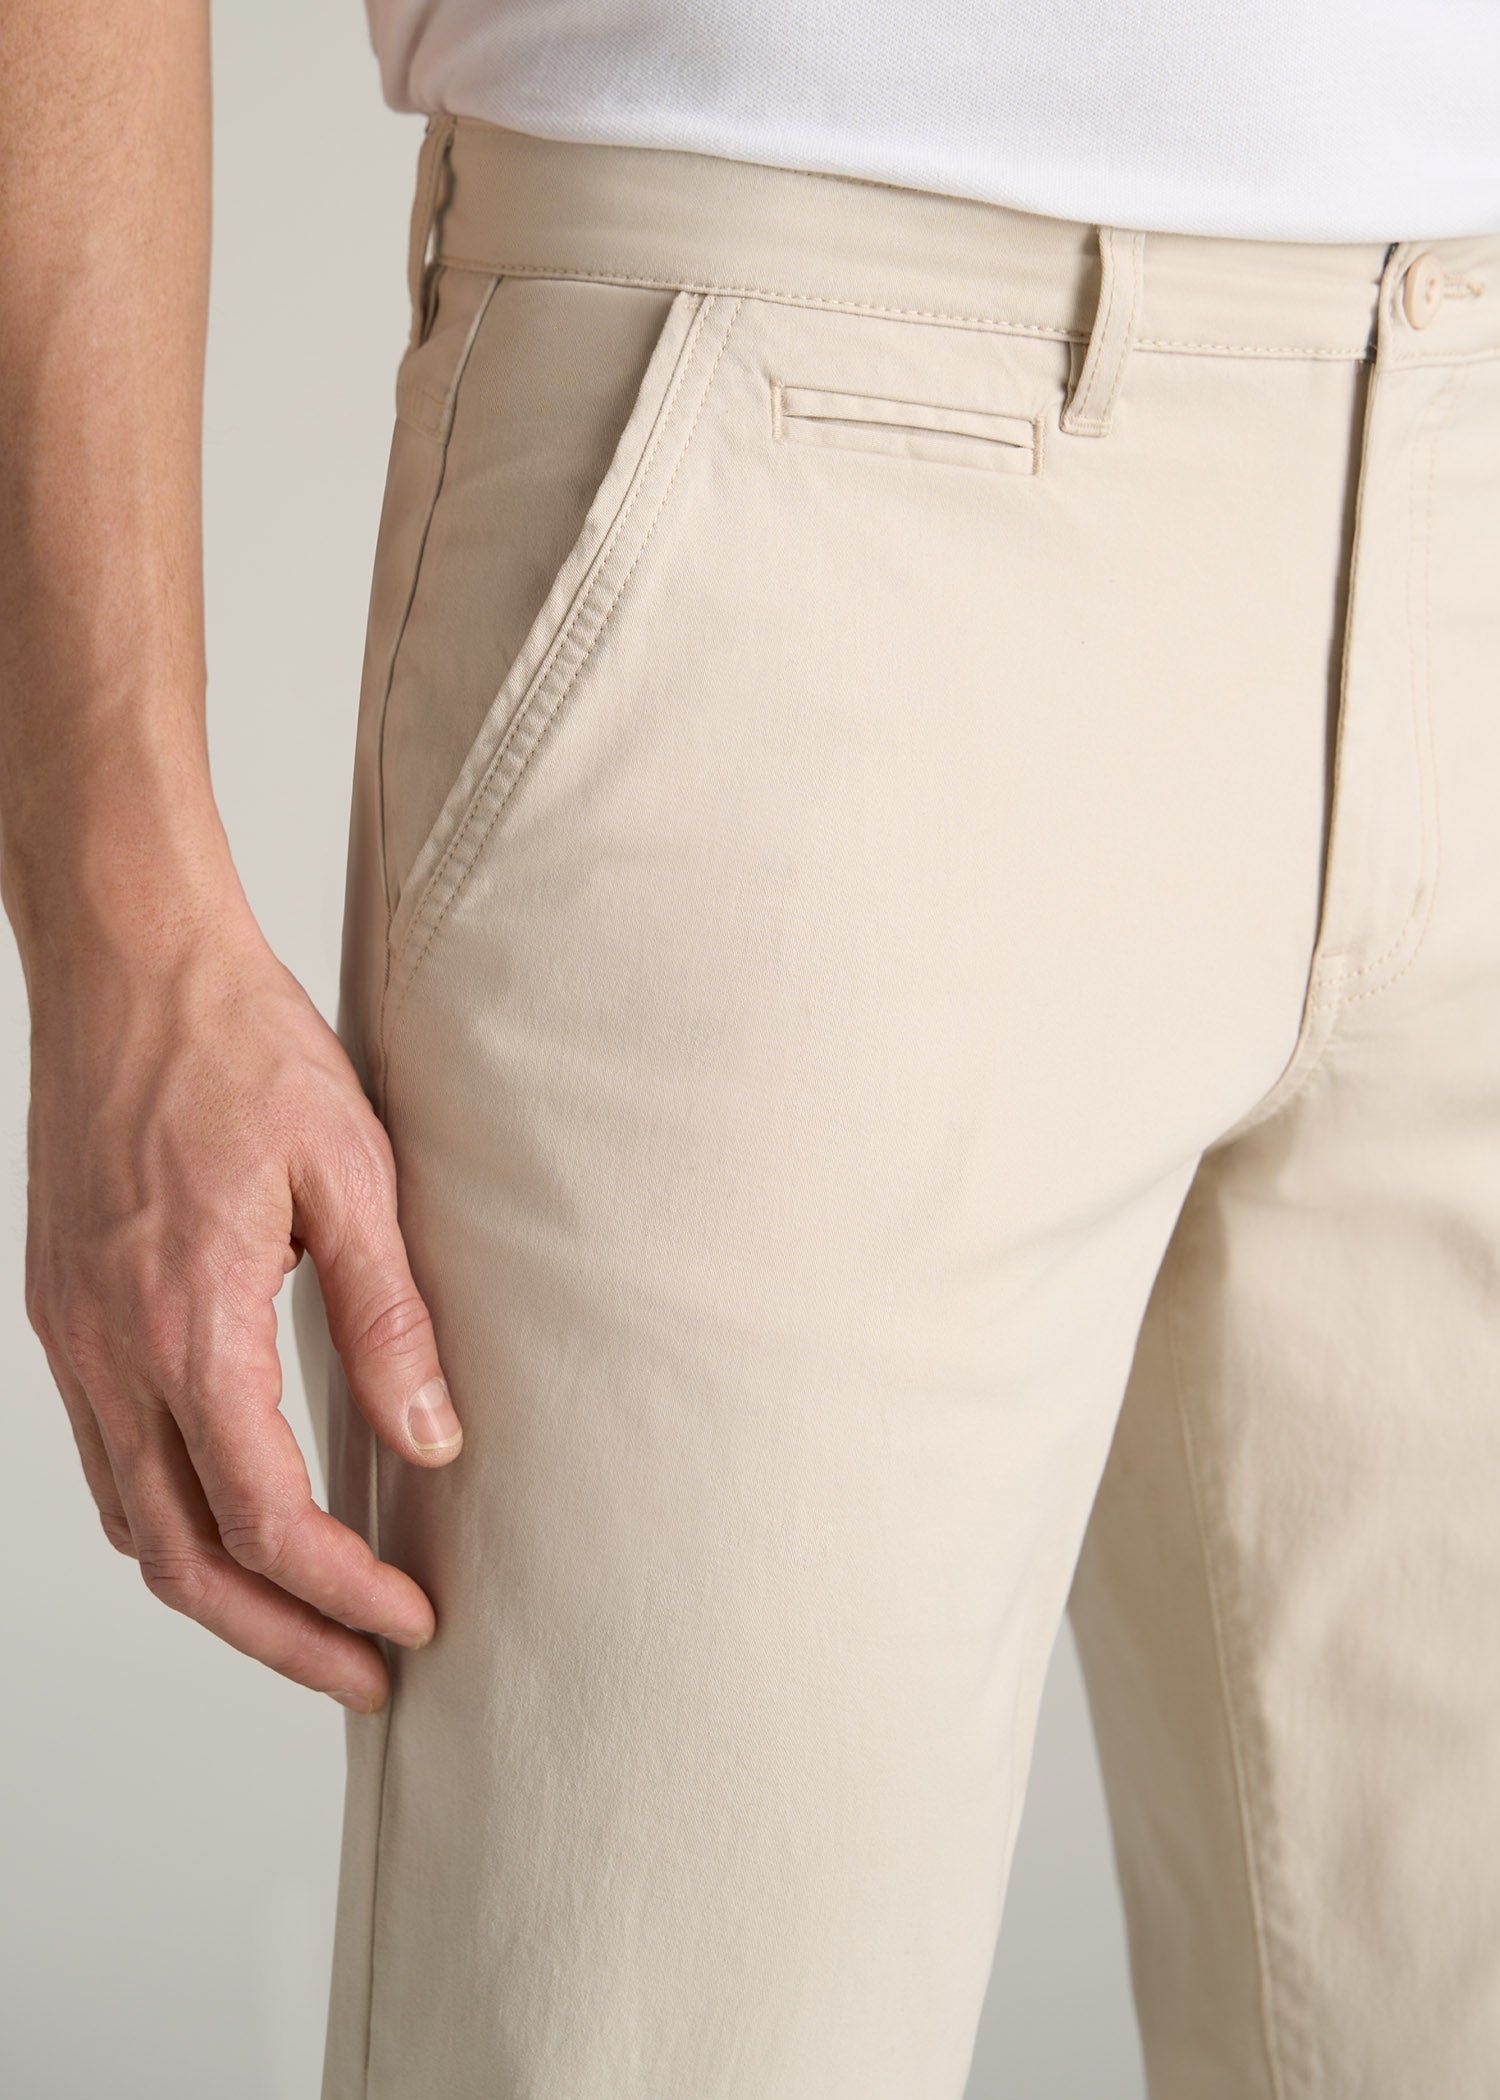 Carman TAPERED Chinos in Soft Beige - Pants for Tall Men